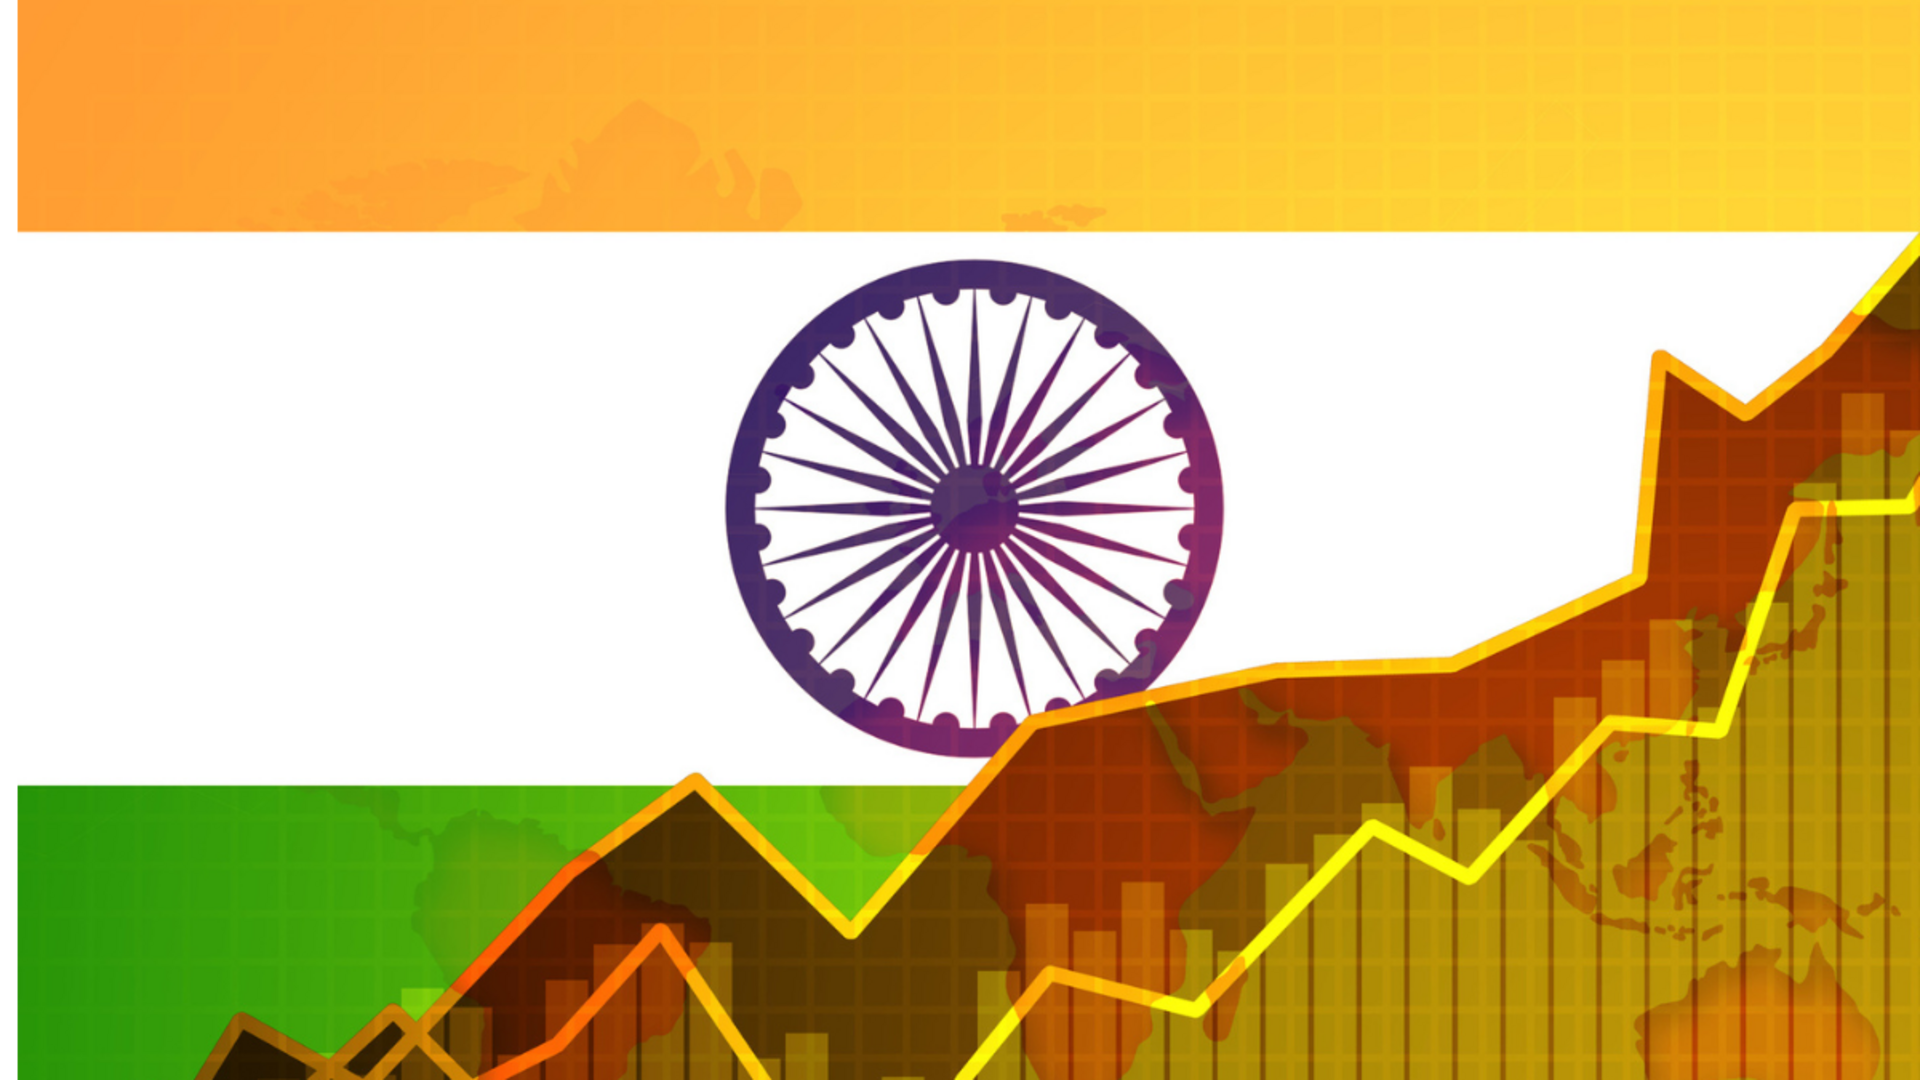 India's growth unlikely to match China's historic levels: Morgan Stanley